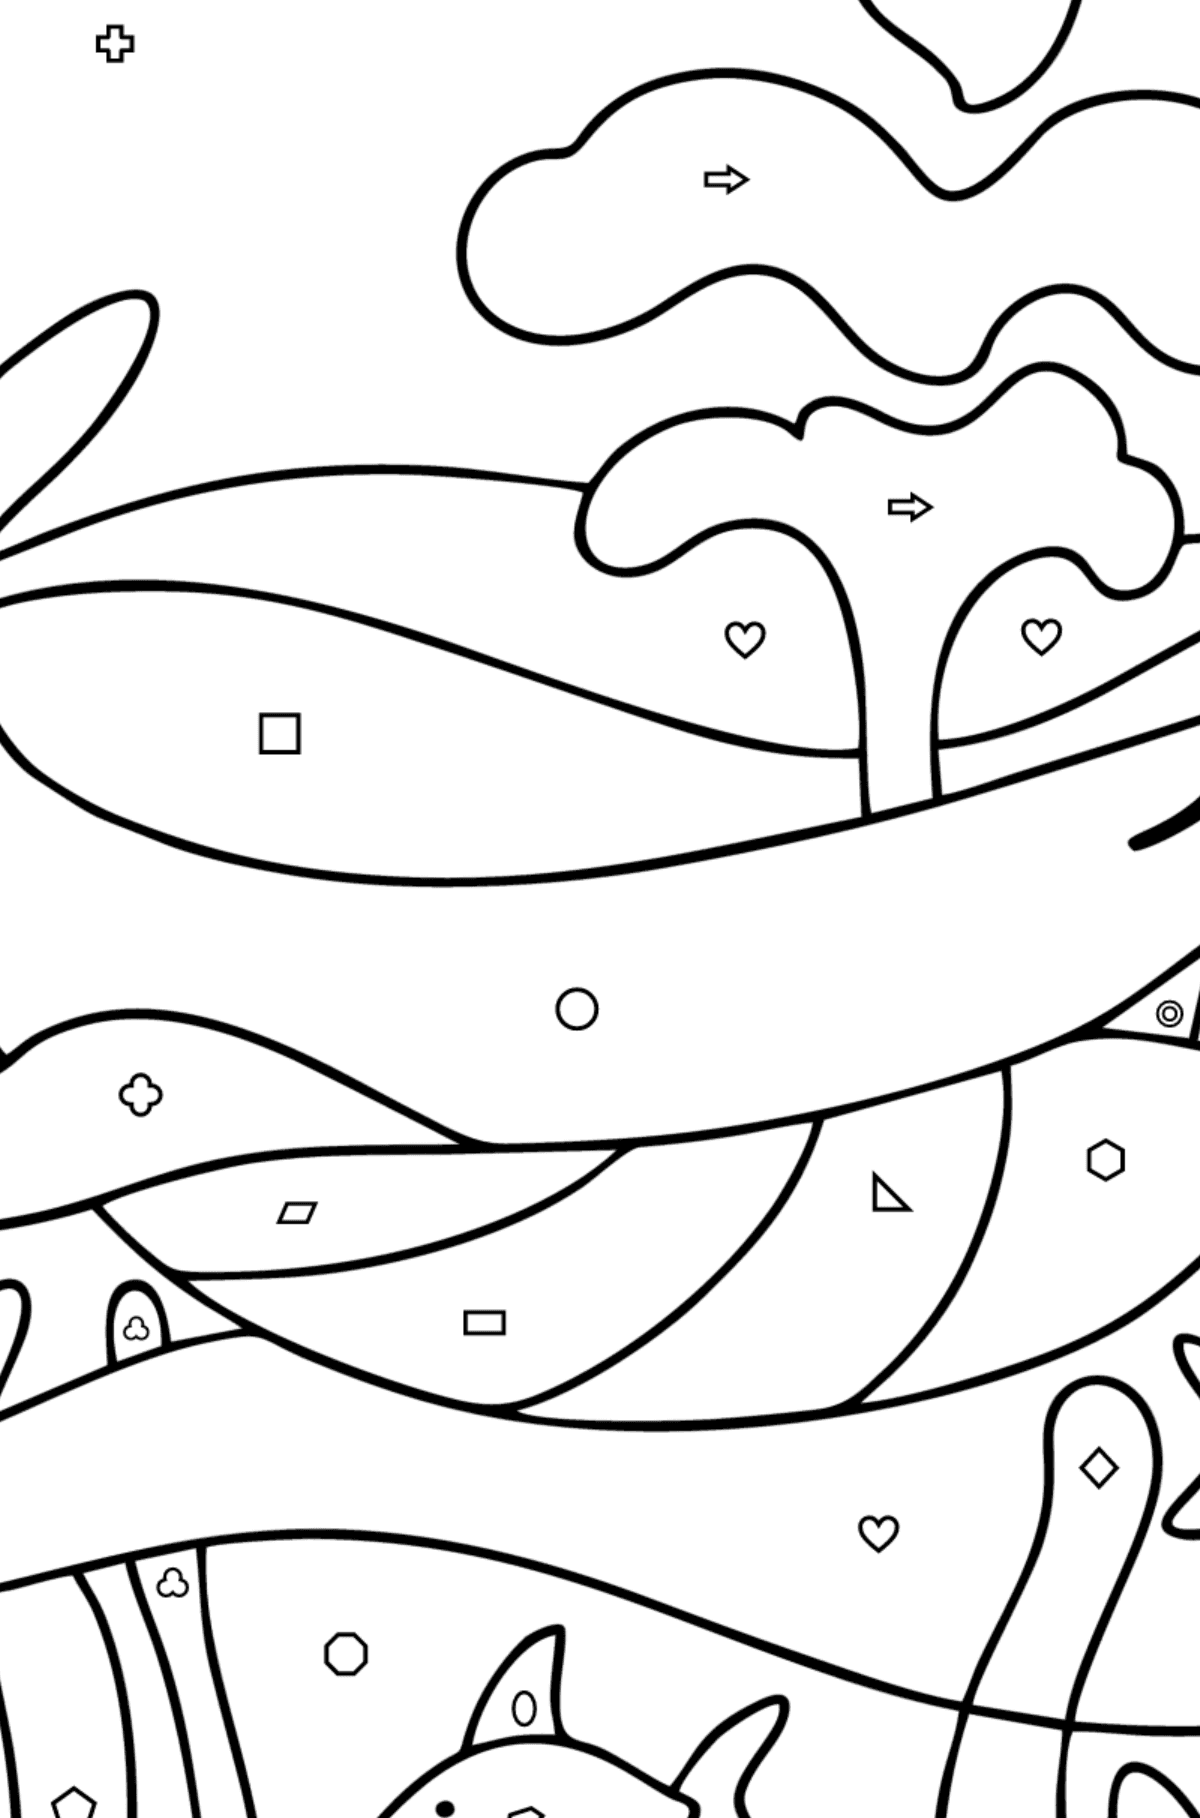 Cute sperm whale coloring page - Coloring by Geometric Shapes for Kids